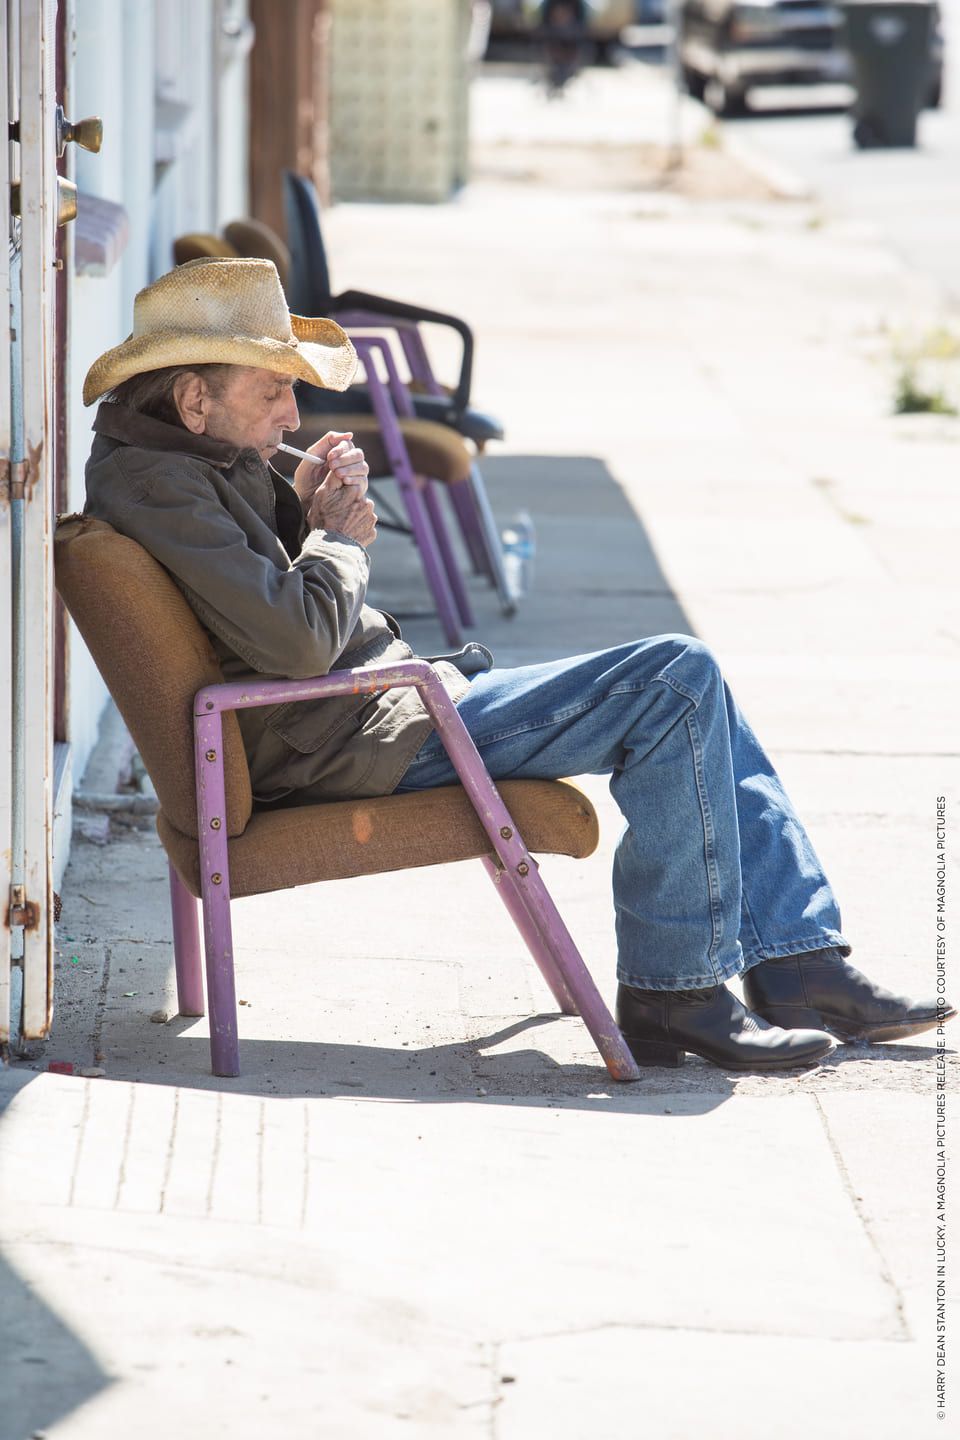 1 © Harry Dean Stanton in LUCKY, a Magnolia Pictures release. Photo courtesy of Magnolia Pictures